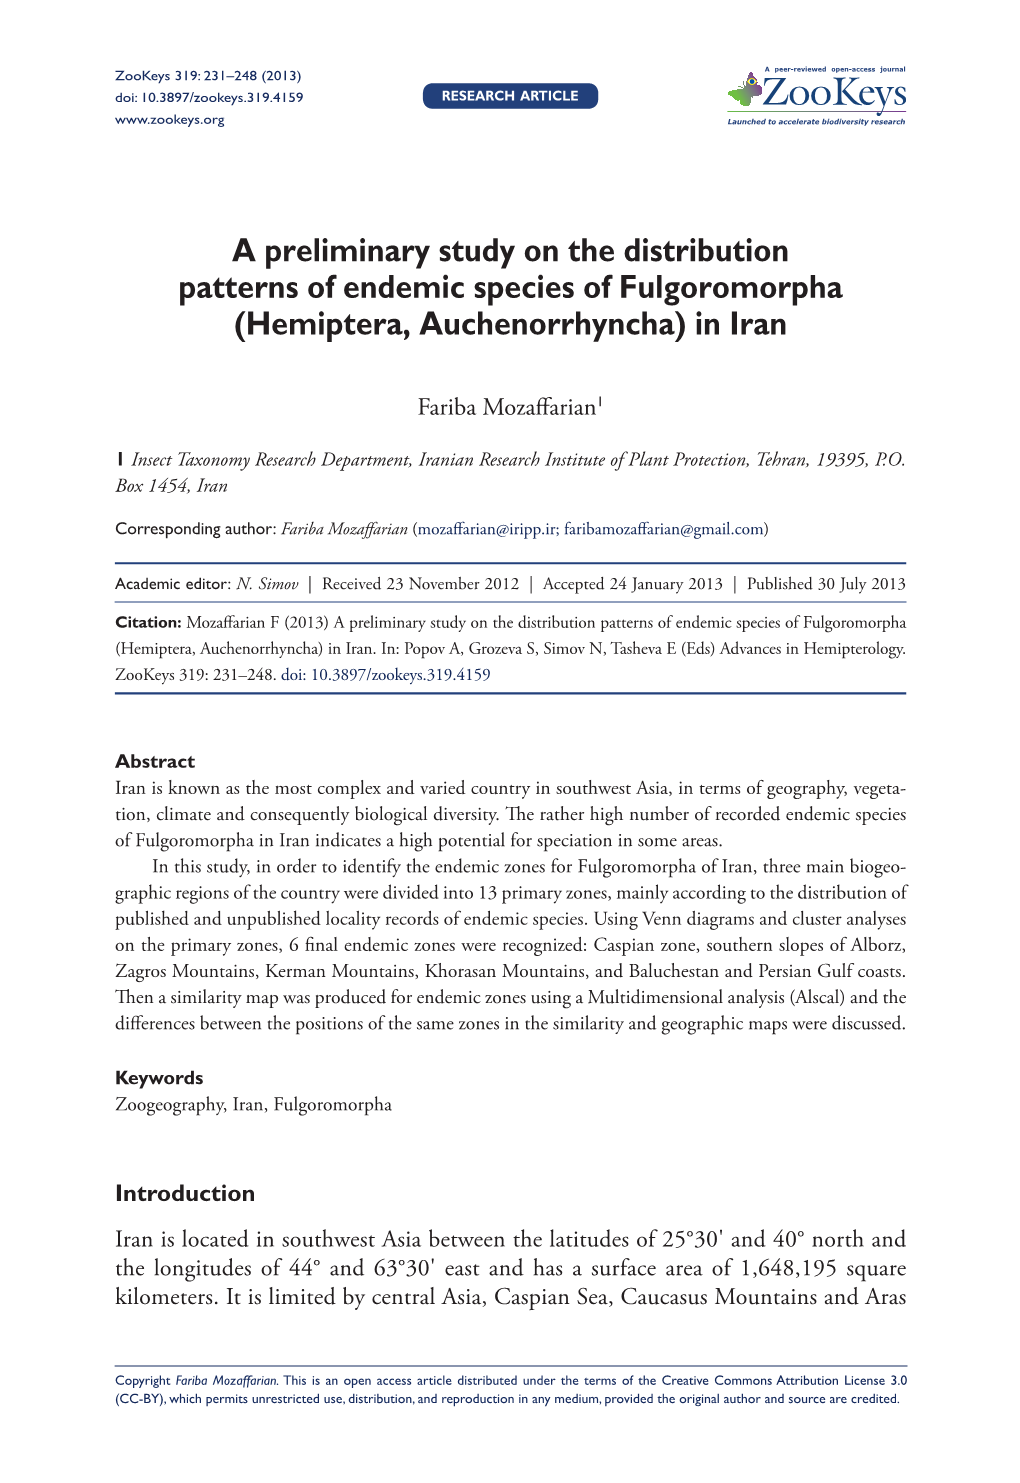 A Preliminary Study on the Distribution Patterns of Endemic Species of Fulgoromorpha (Hemiptera, Auchenorrhyncha) in Iran